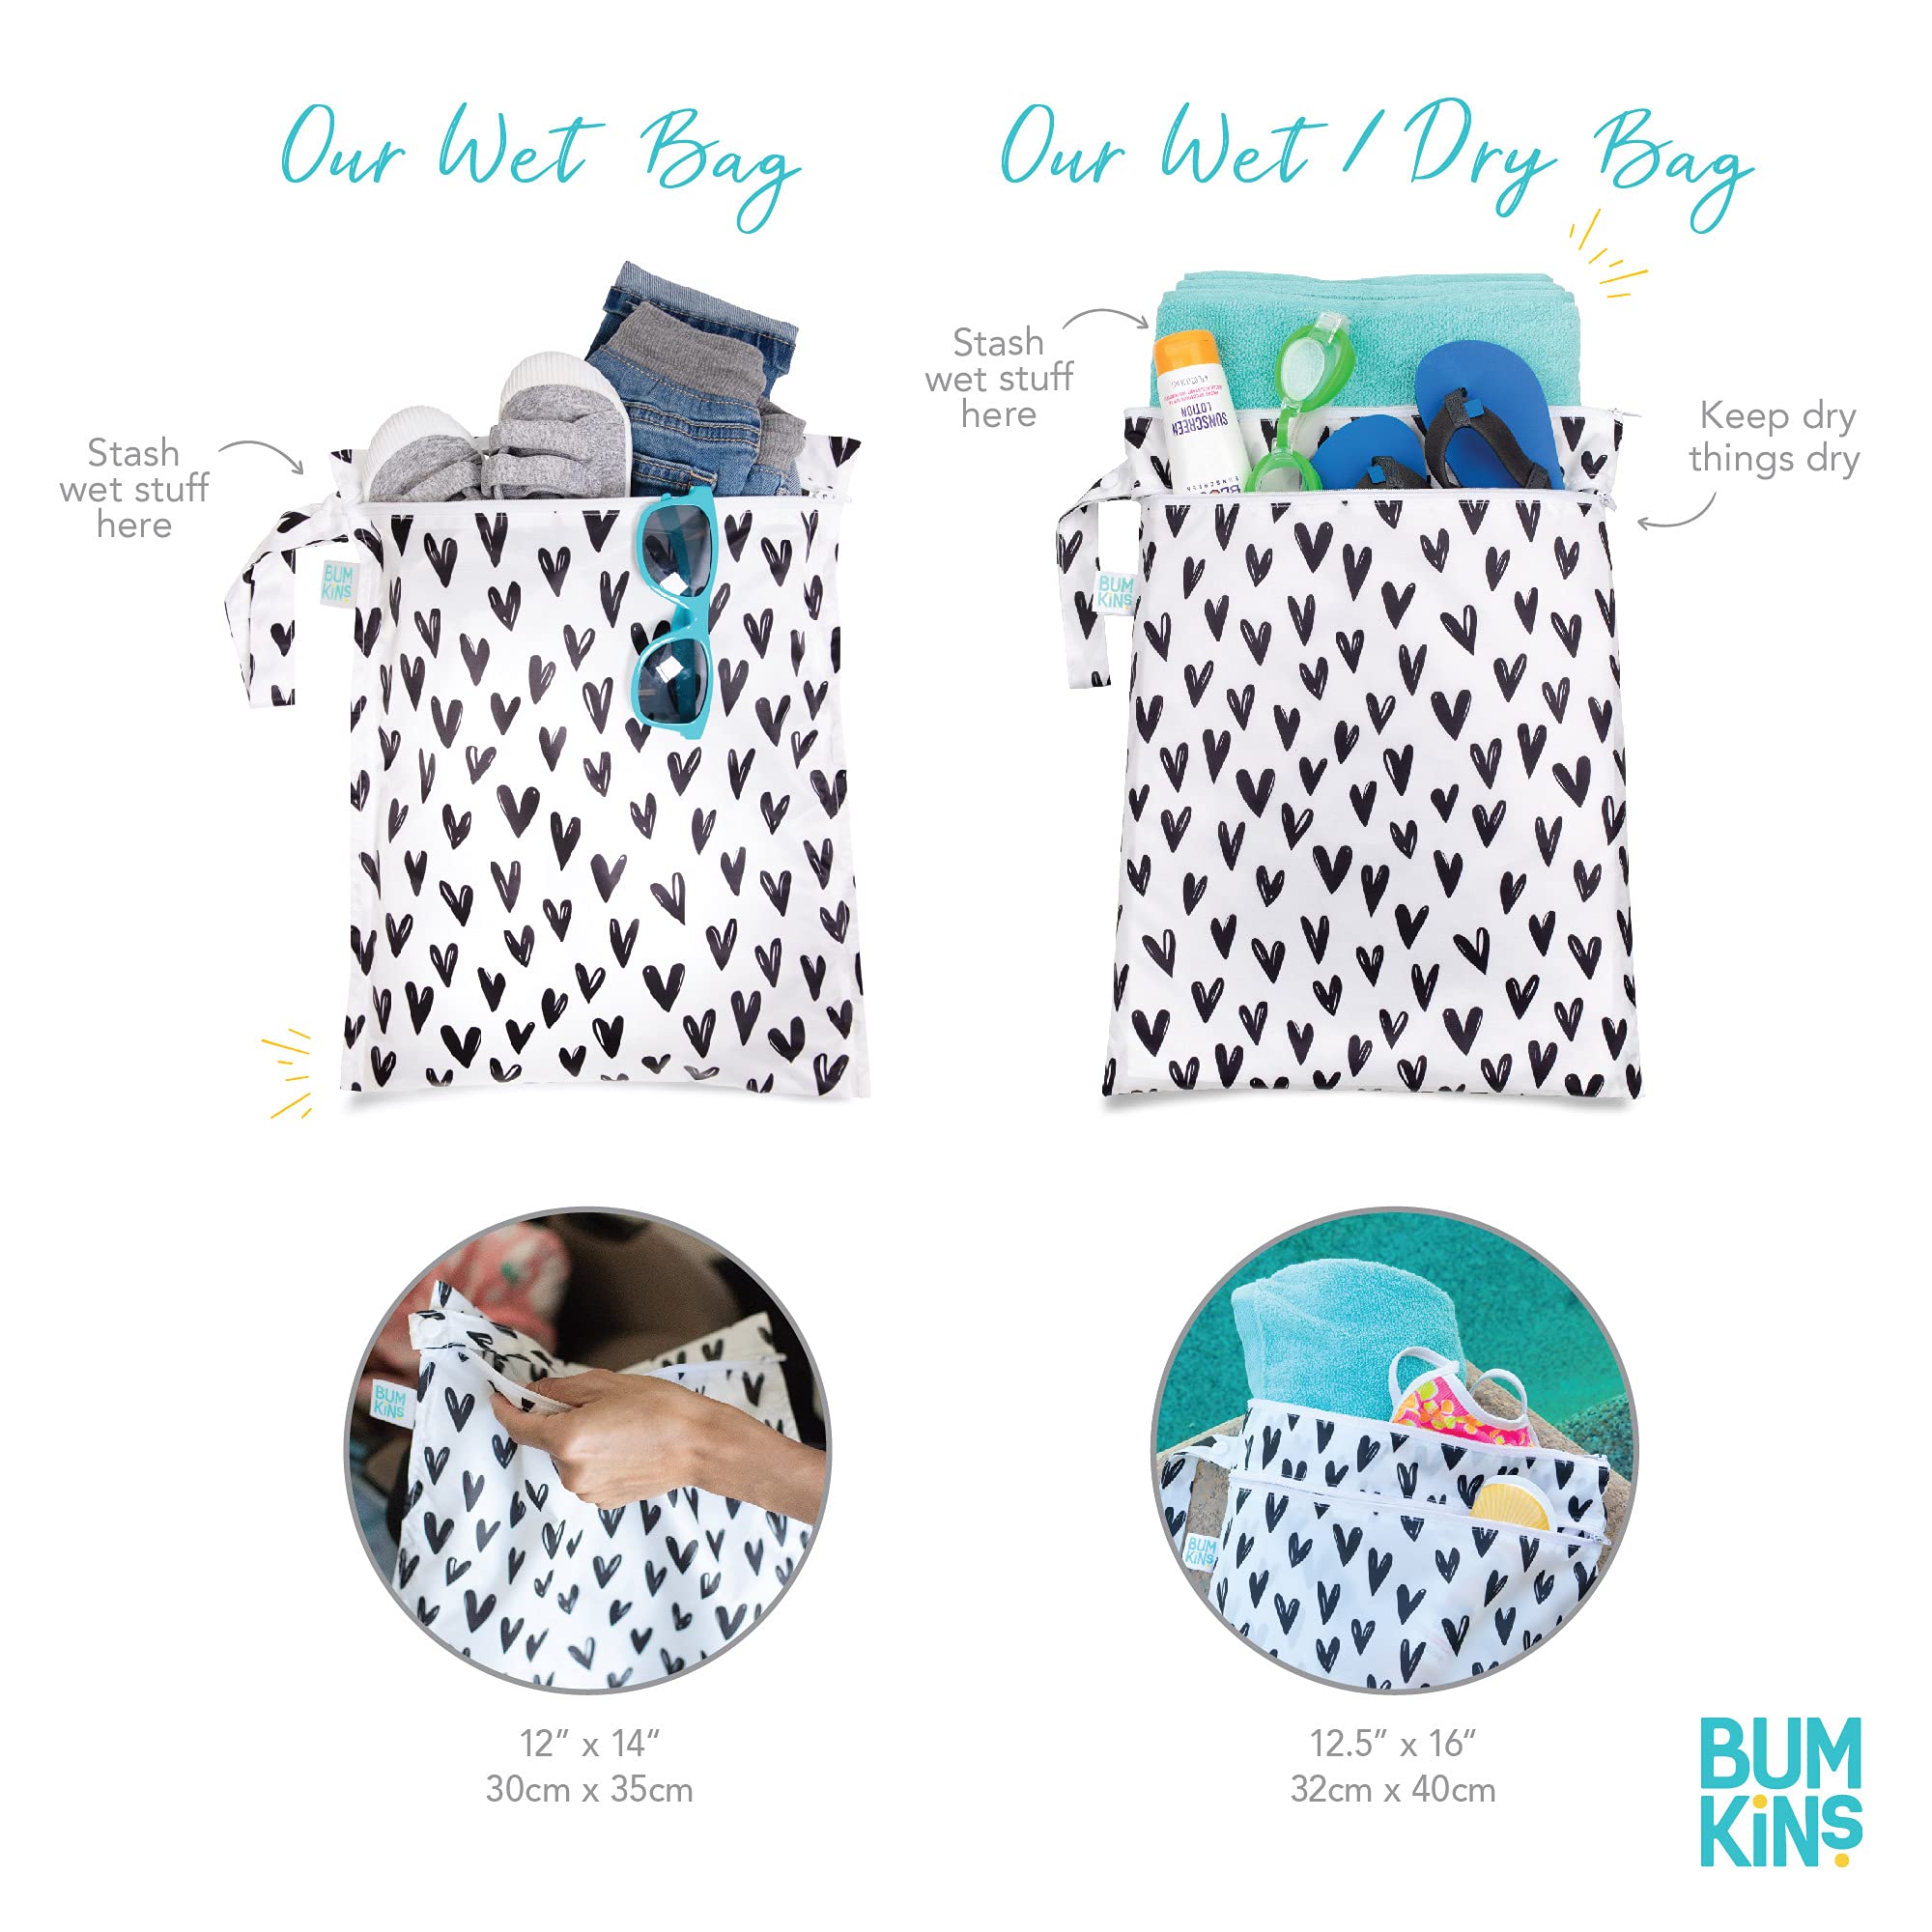 Bumkins Waterproof Wet Bag for Baby, Travel, Swim Suit, cloth Diapers, Pump Parts, Pool, gym clothes, Toiletry, Strap to Strolle